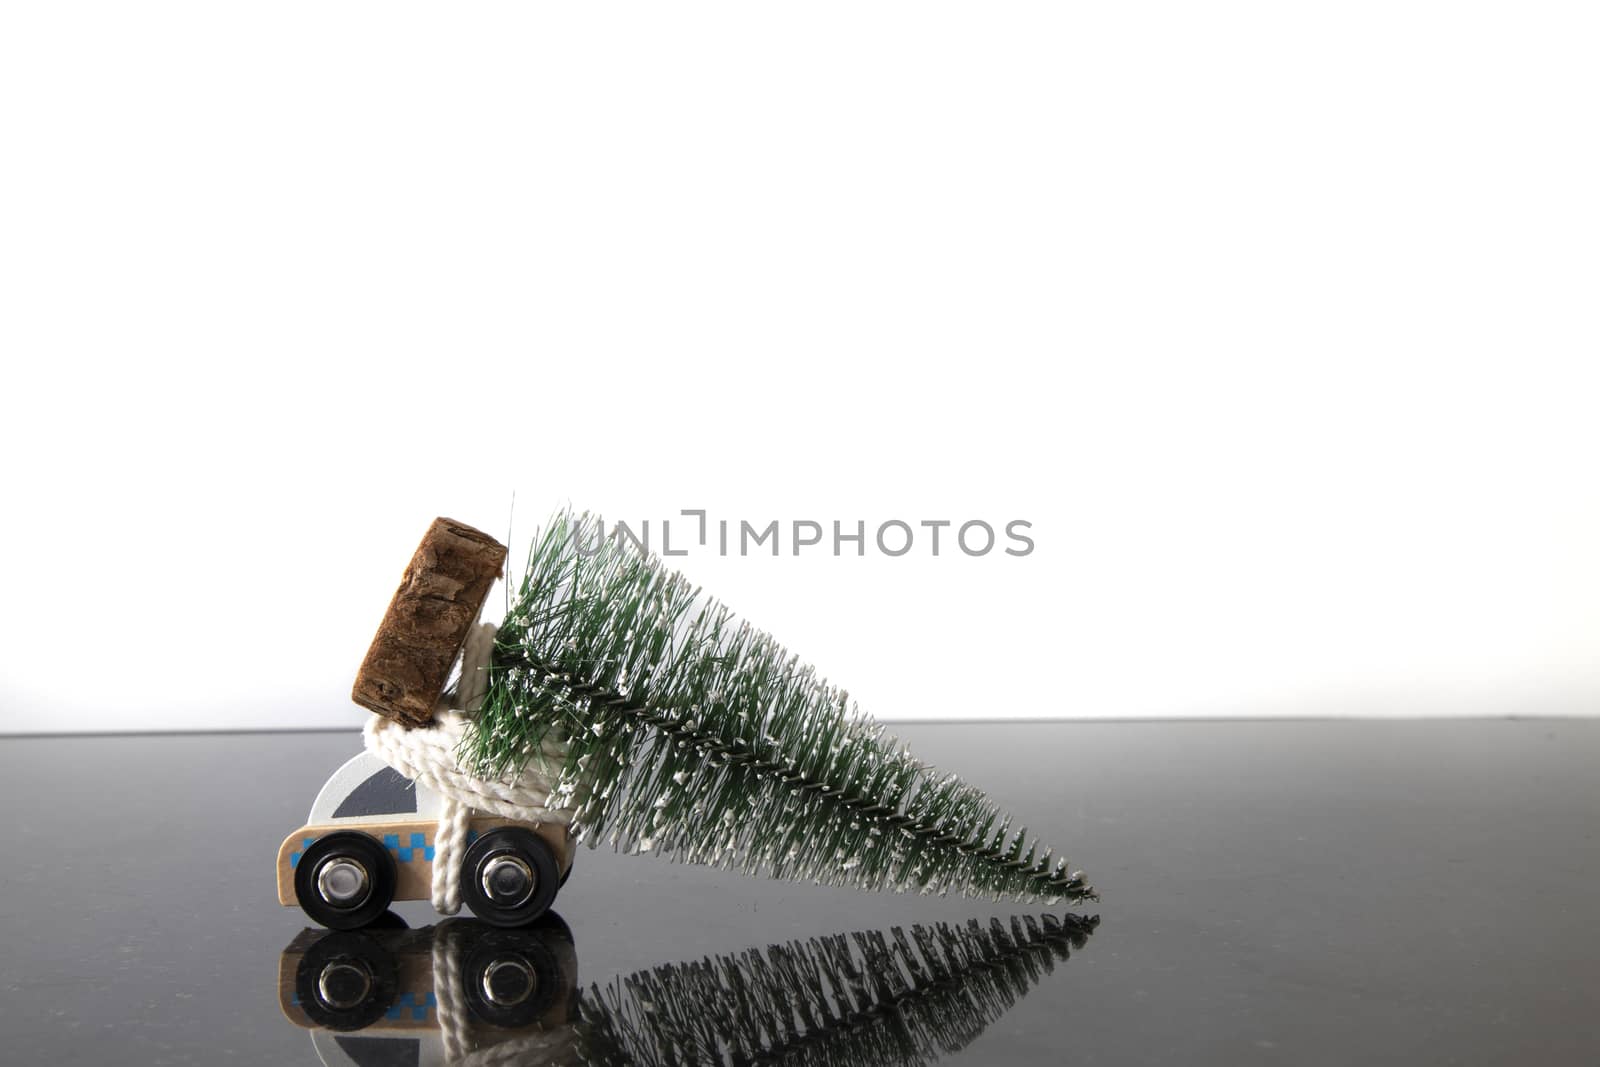 Image of a toy ambulance and a miniature christmas tree. Isolated black and white background with reflections of the subjects on the smooth surface.